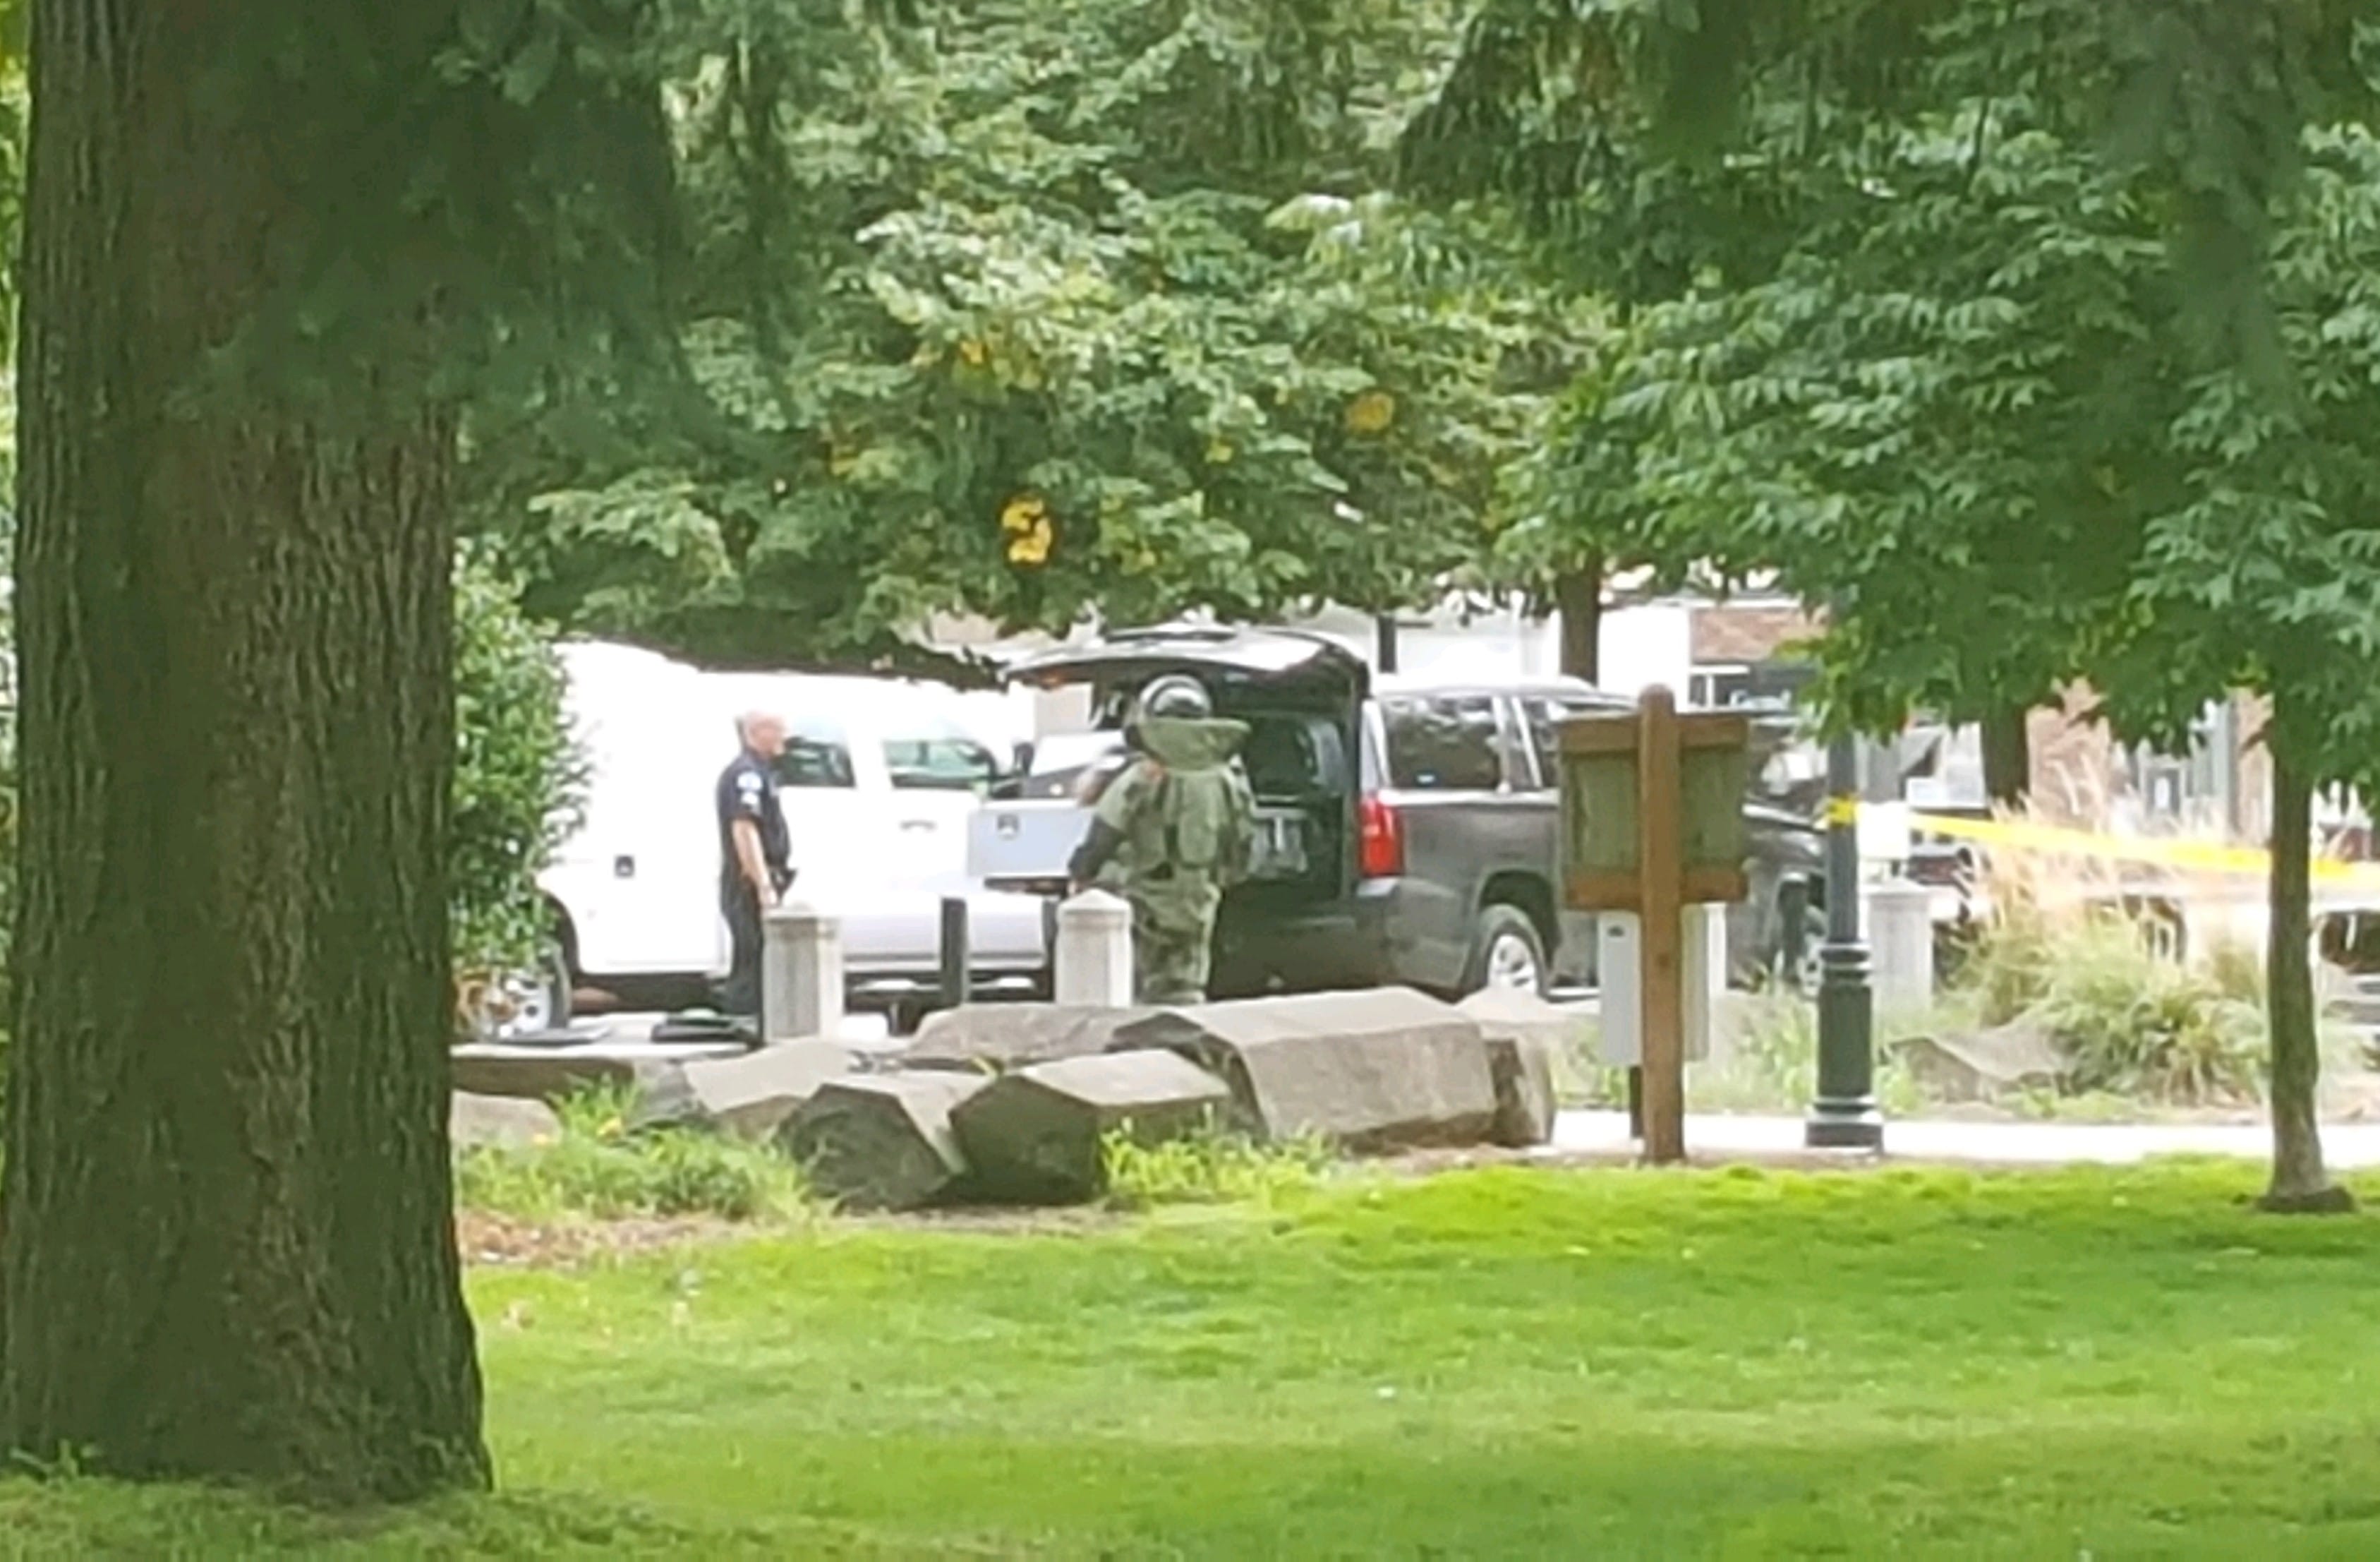 A Vancouver Police Department Bomb Unit officer responds to a call at Esther Short Park on Friday. A Clark County Dispatcher said a man wearing a mask left a bag at the park.